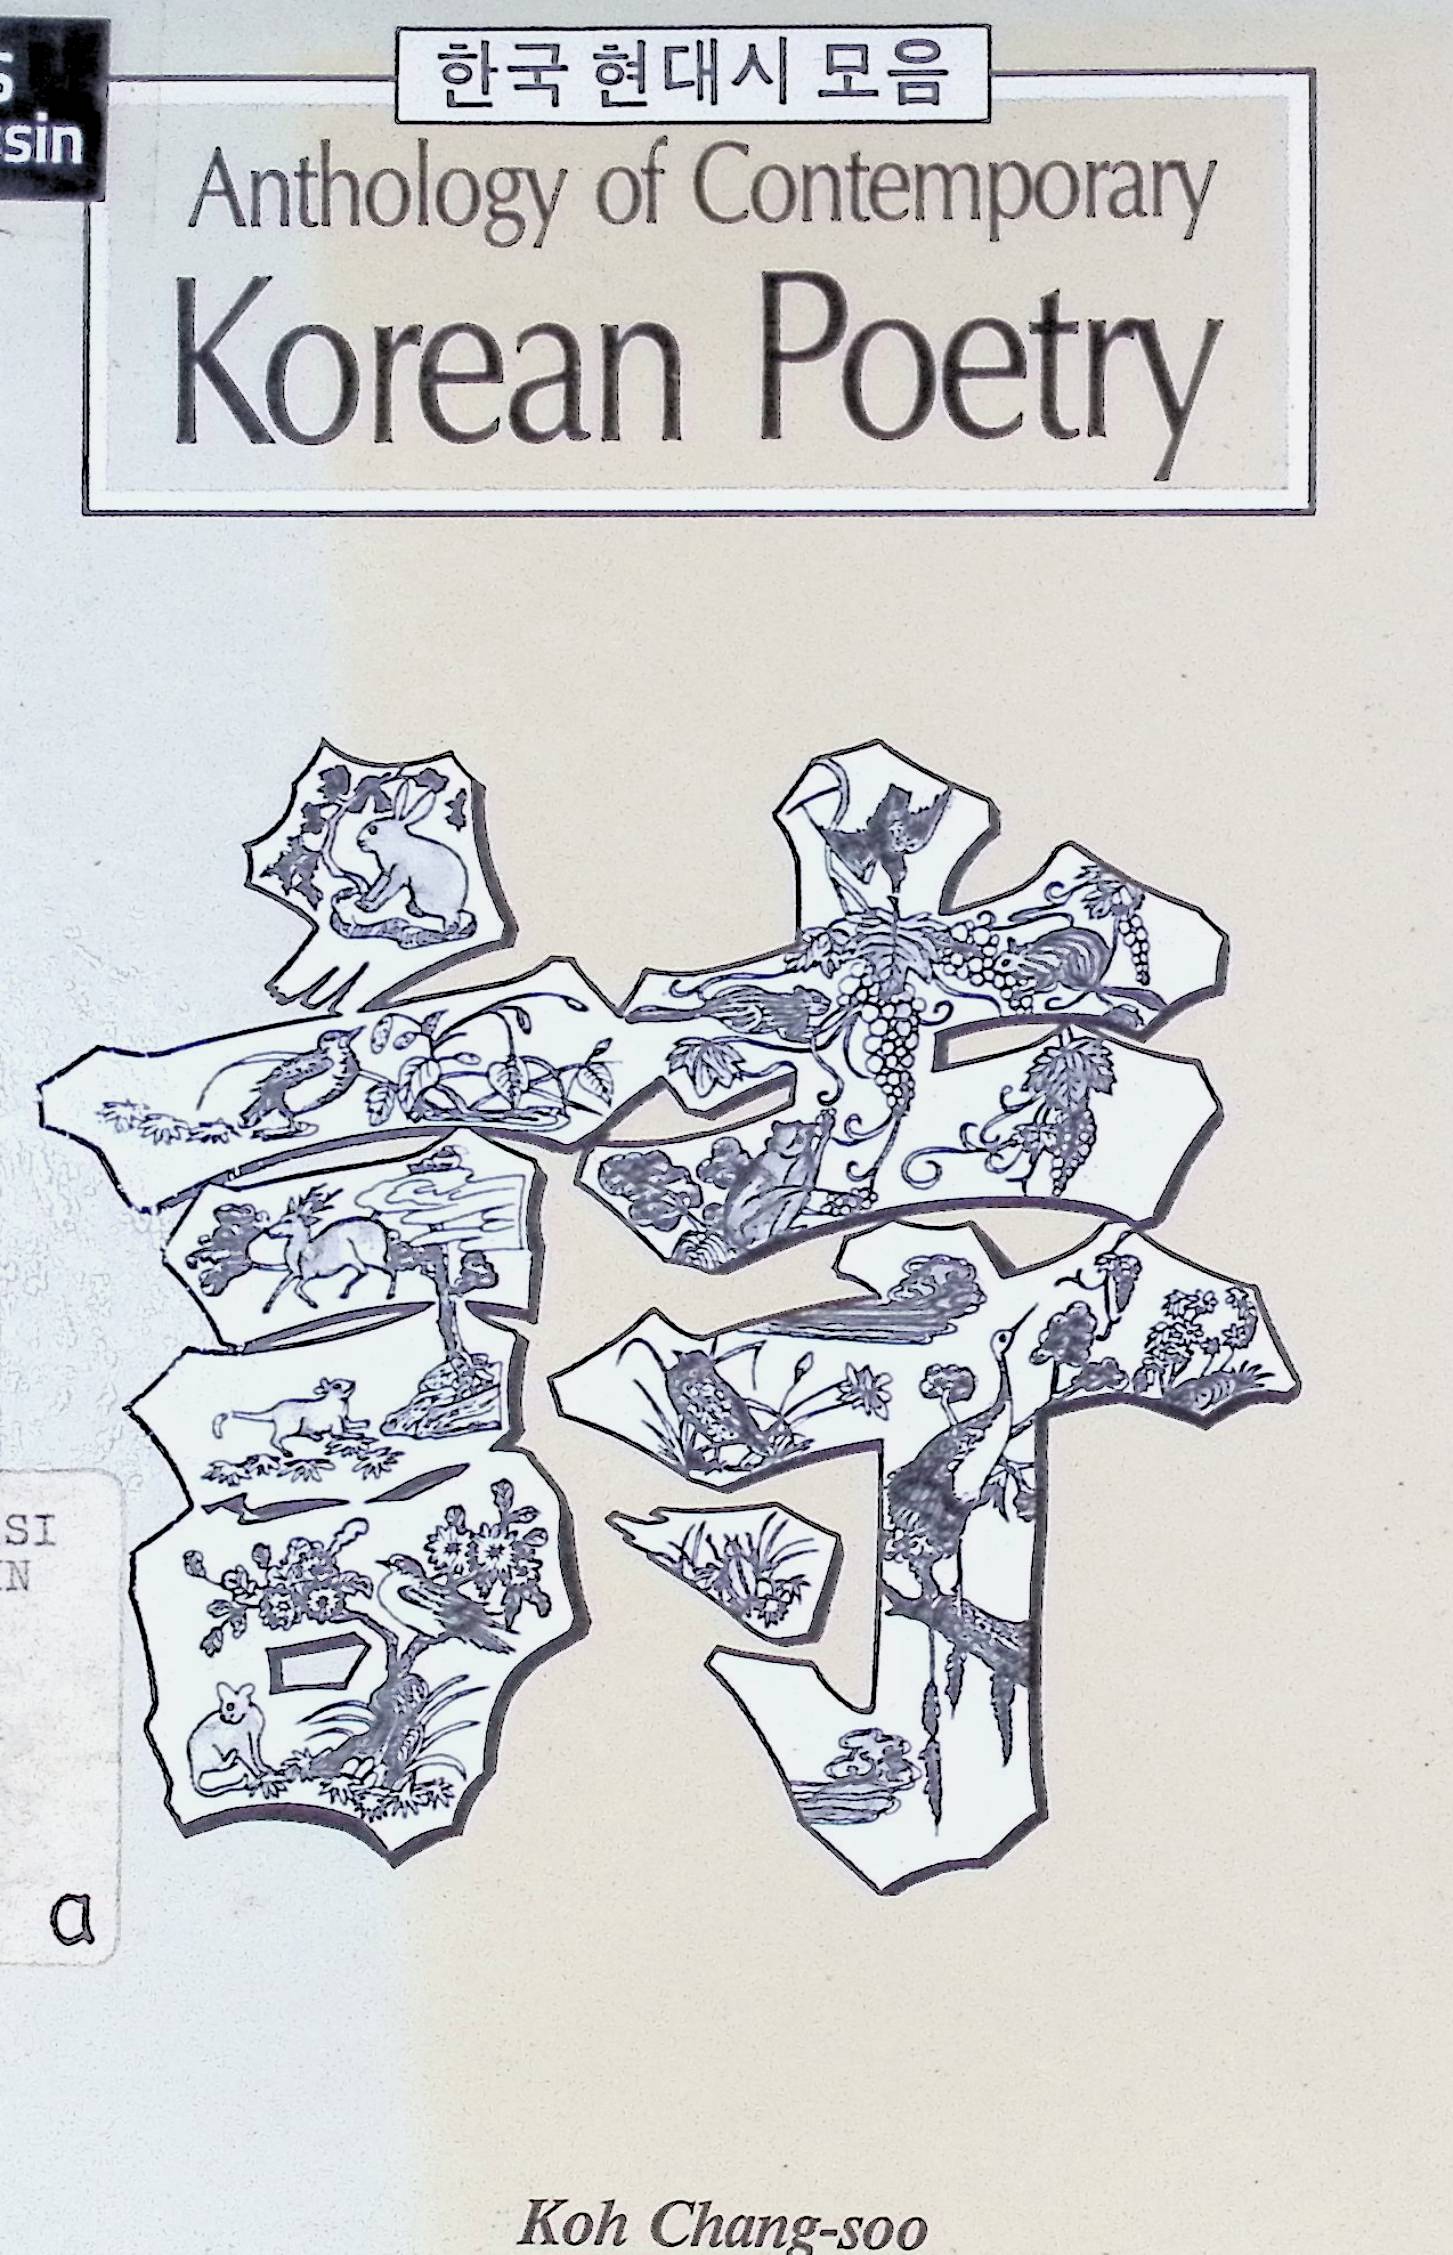 Anthology of contemporary Korean poetry